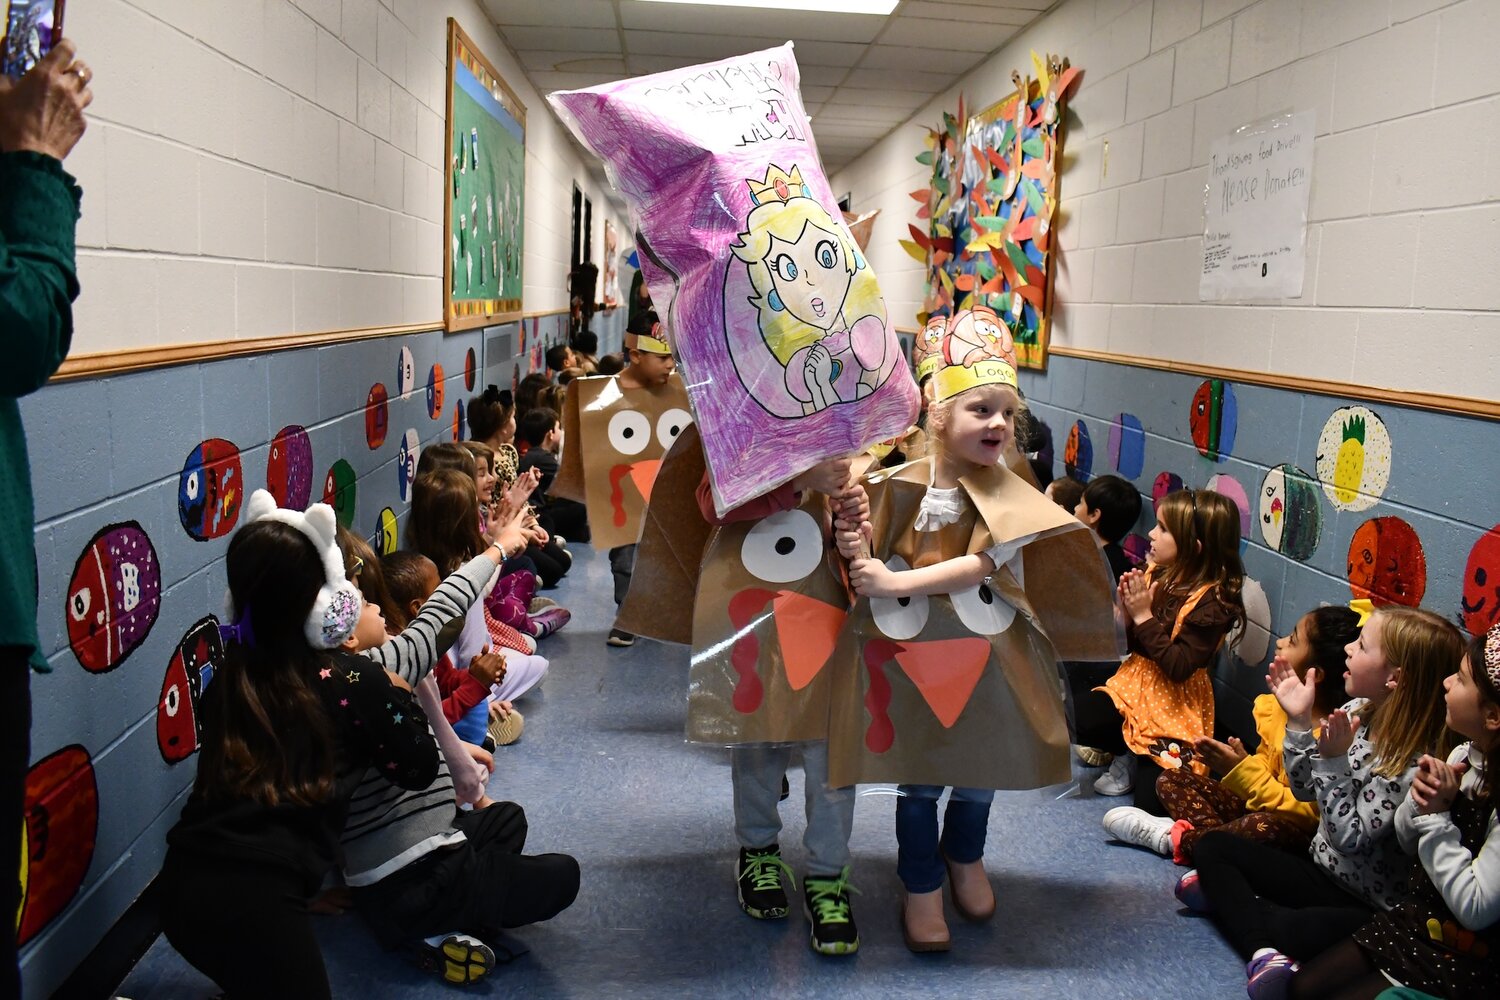 Kindergarteners waved posters of their favorite characters during their annual “Balloons Over Rhame” parade. Some crowd favorites included Princess Peach, Barbie, Yoda, and minions.